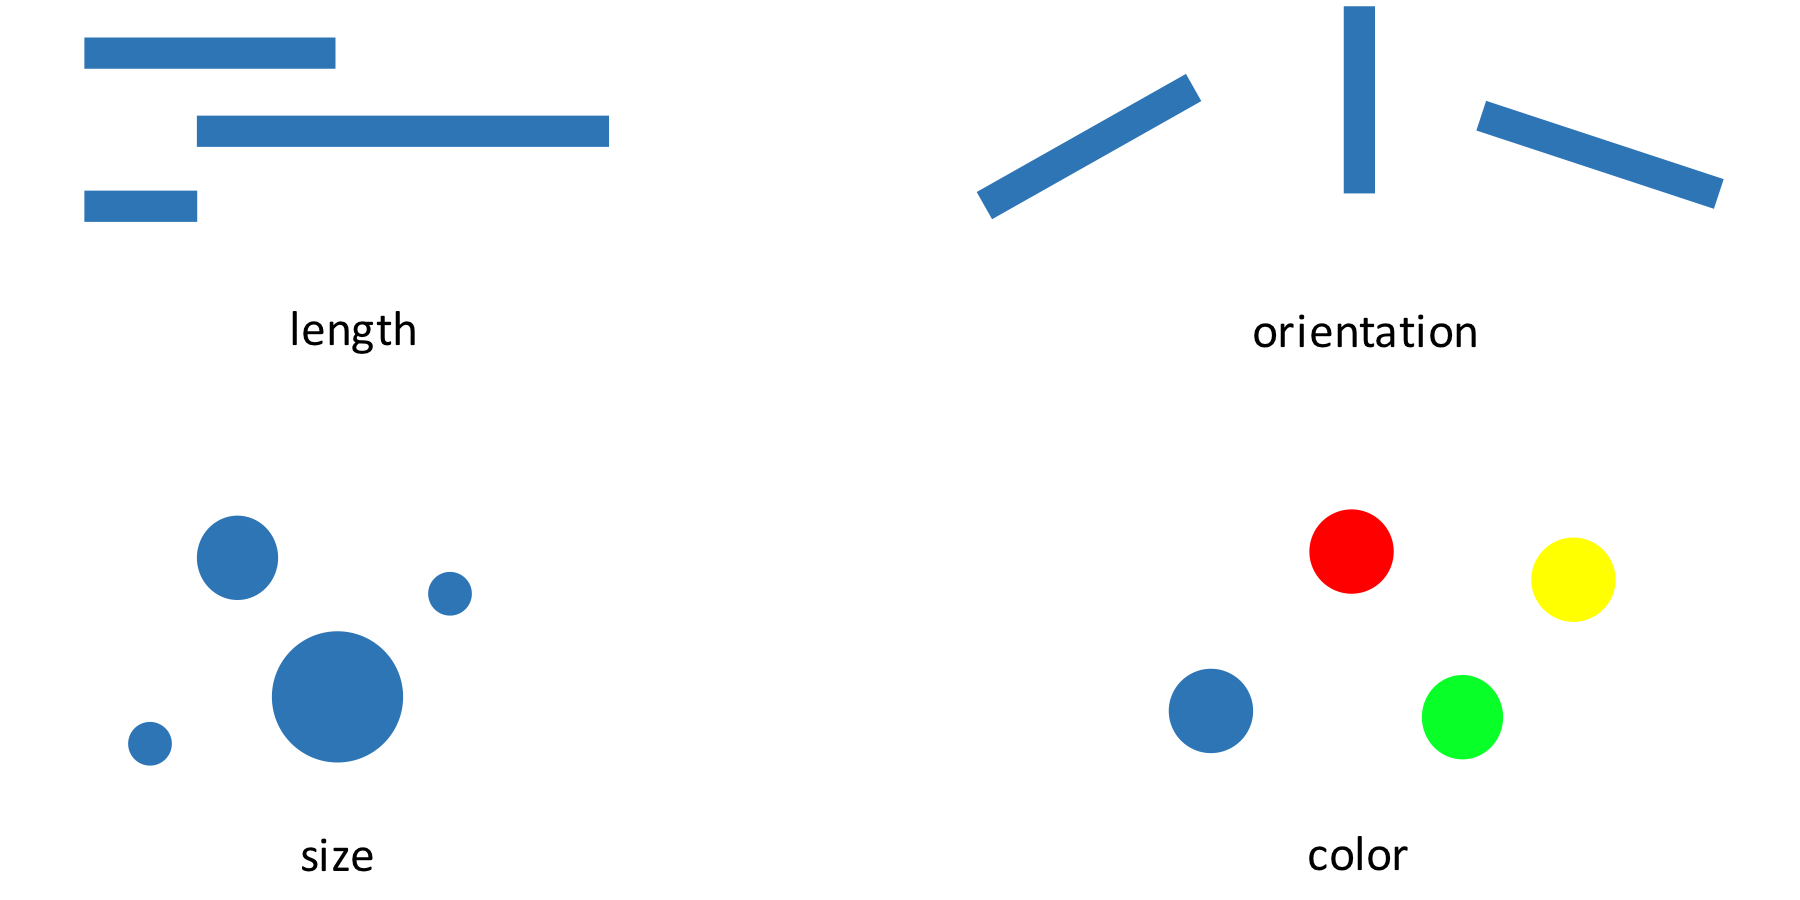 Visual representation of length, size, orientation and color.